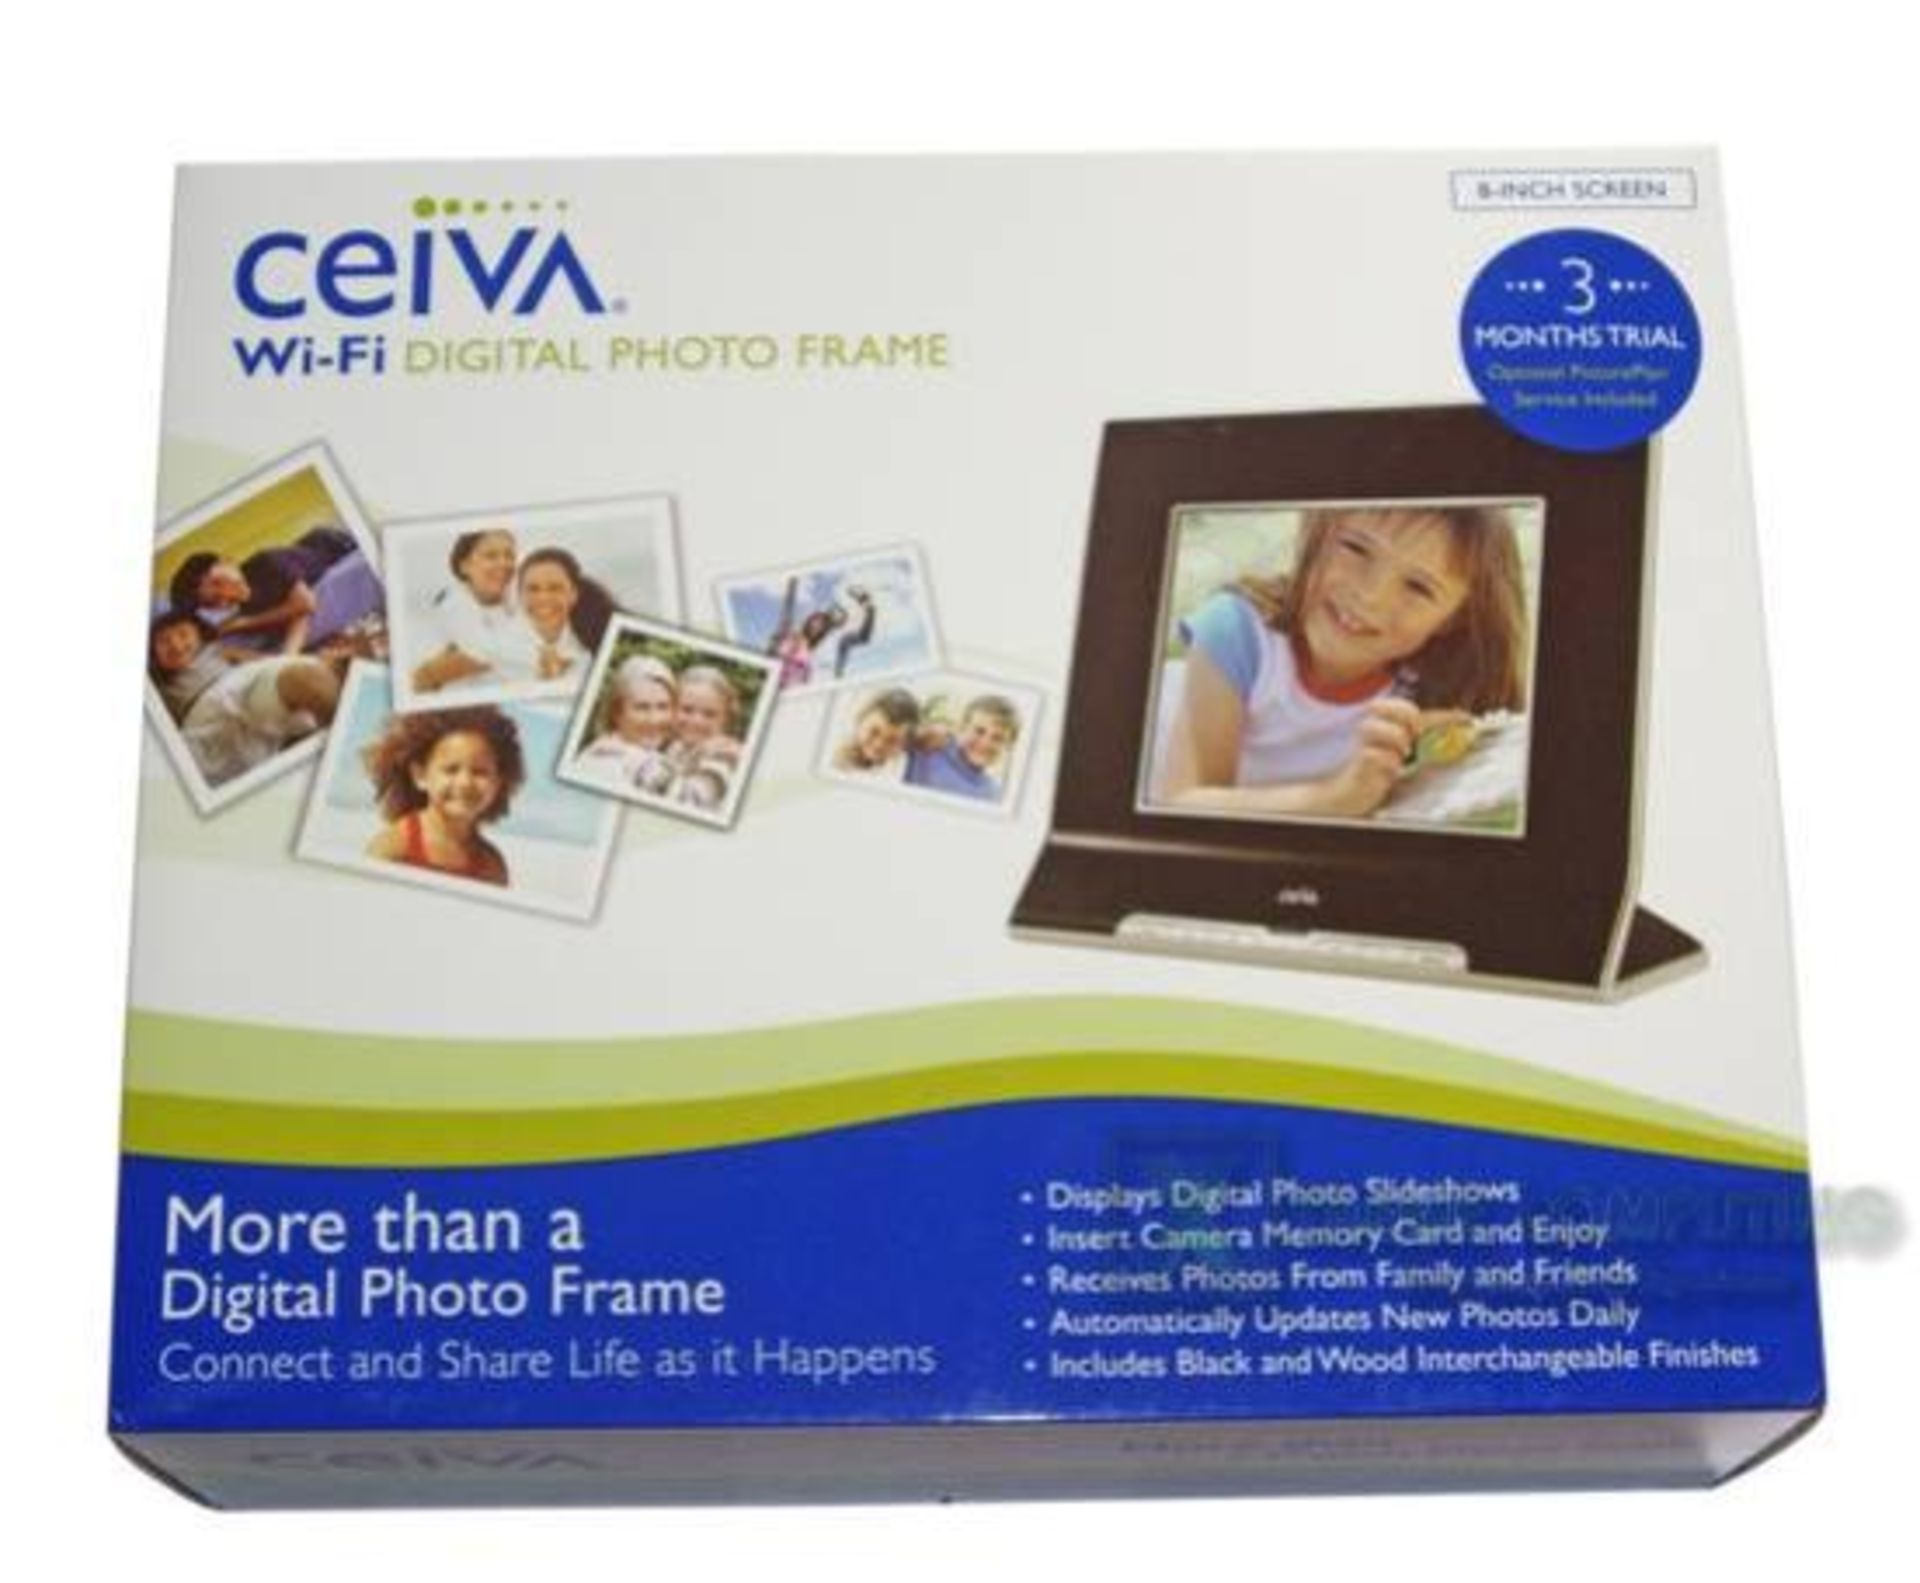 V *TRADE QTY* Brand New Ceiva 8" Digital Photo Frame with SD Card Slot - Wi-Fi and Broadband Ready - - Image 2 of 2